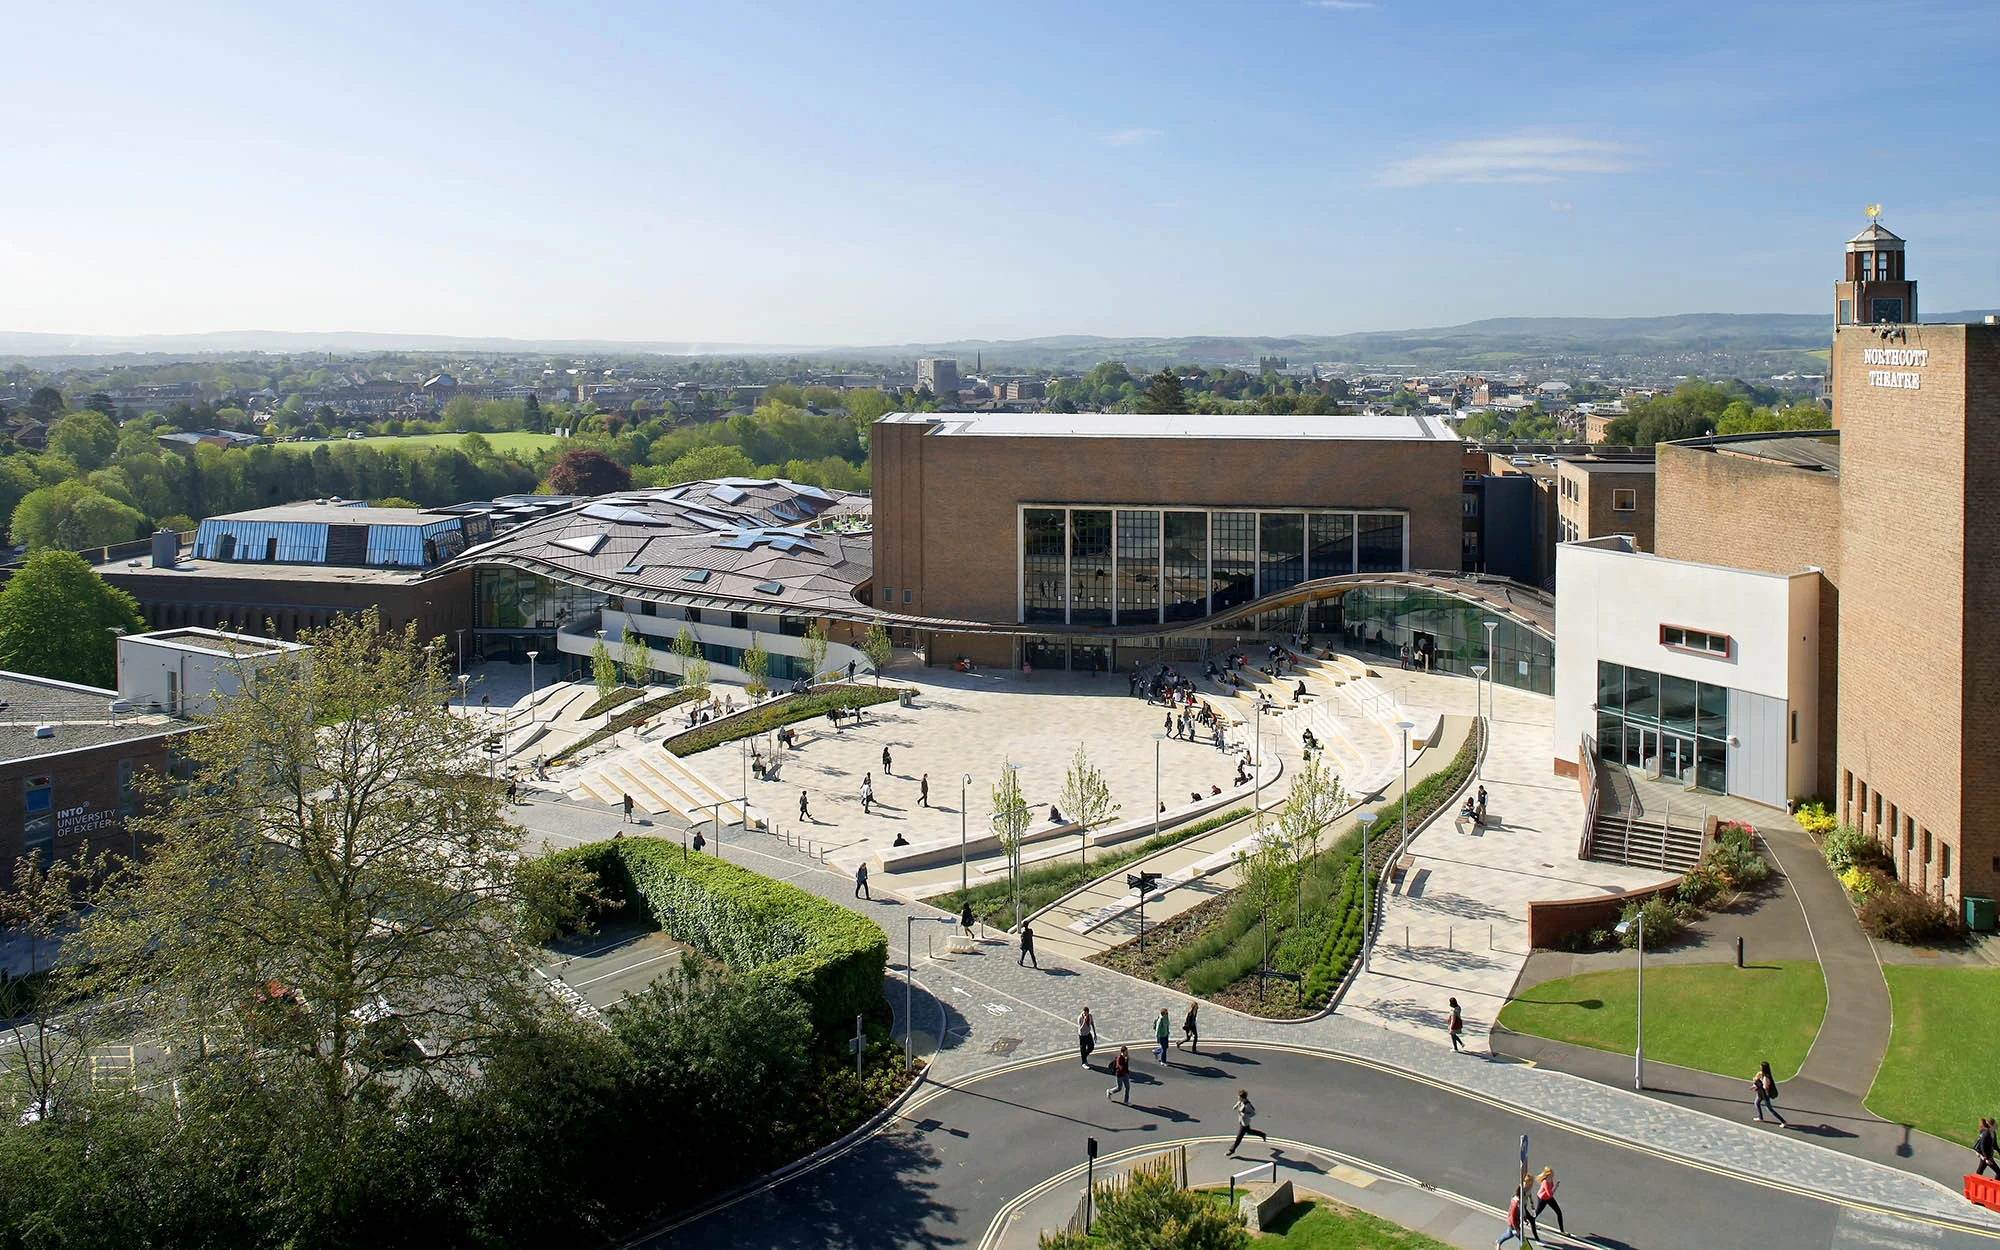 aerial view of the Forum University of Exeter